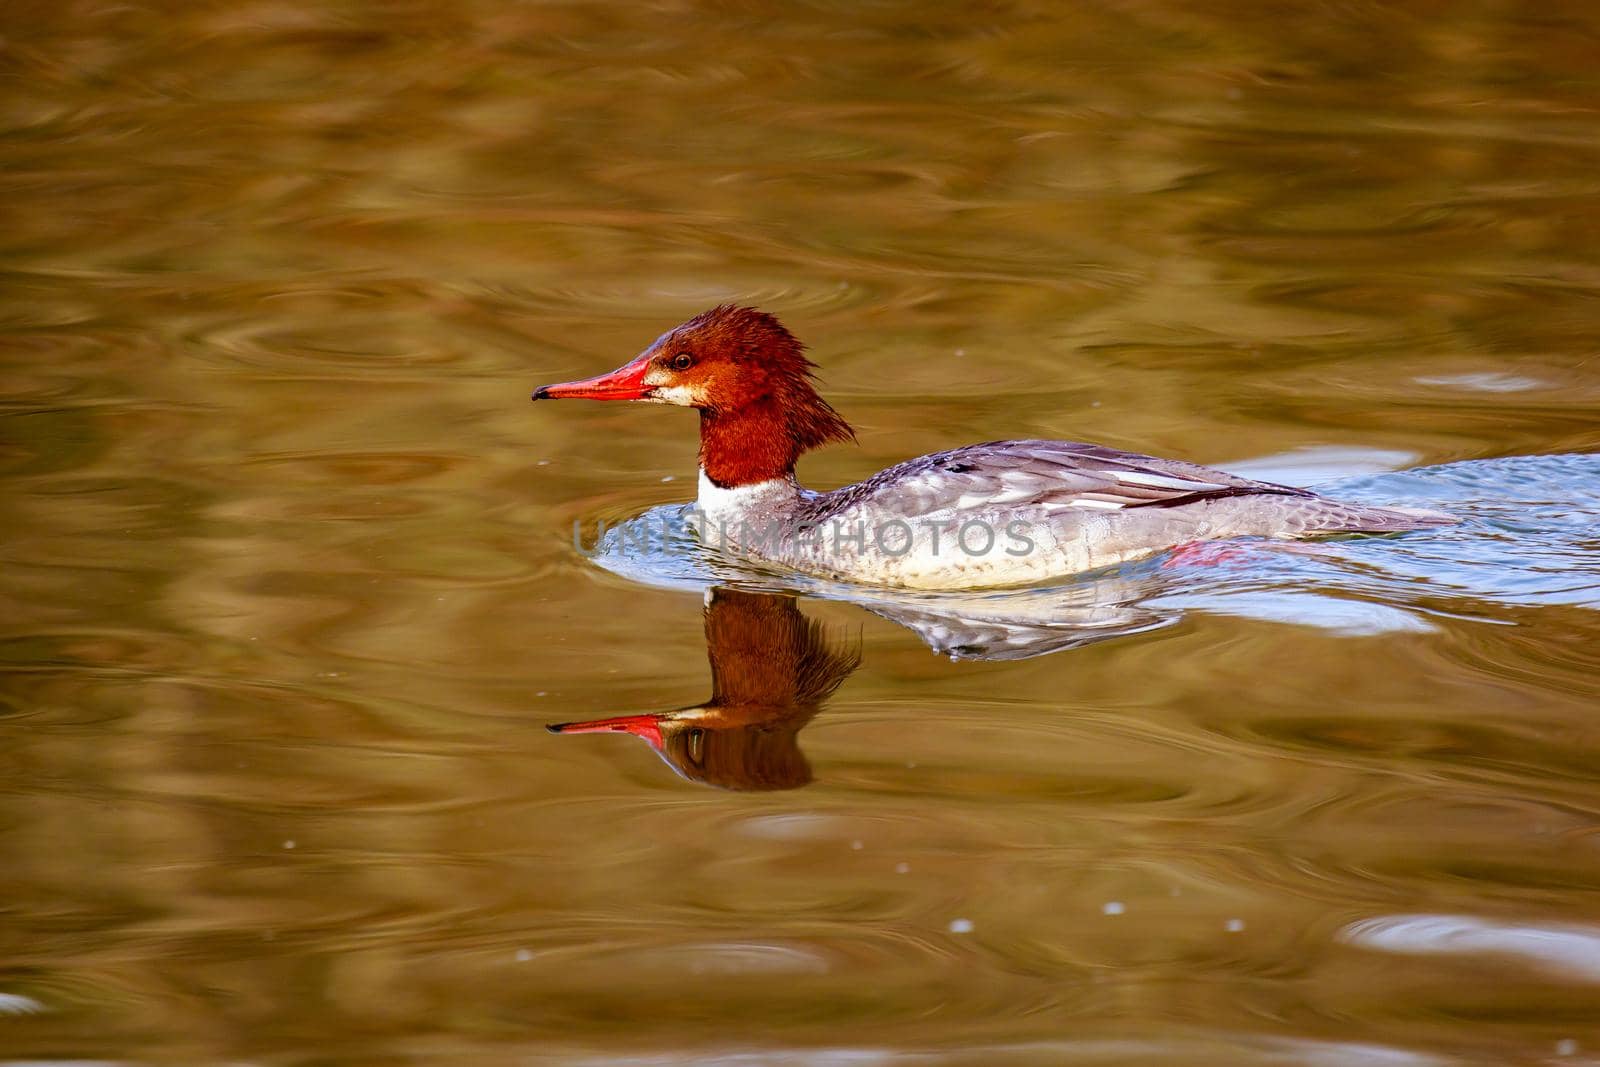 A female common merganser swims in the lake, with reflection in the water.